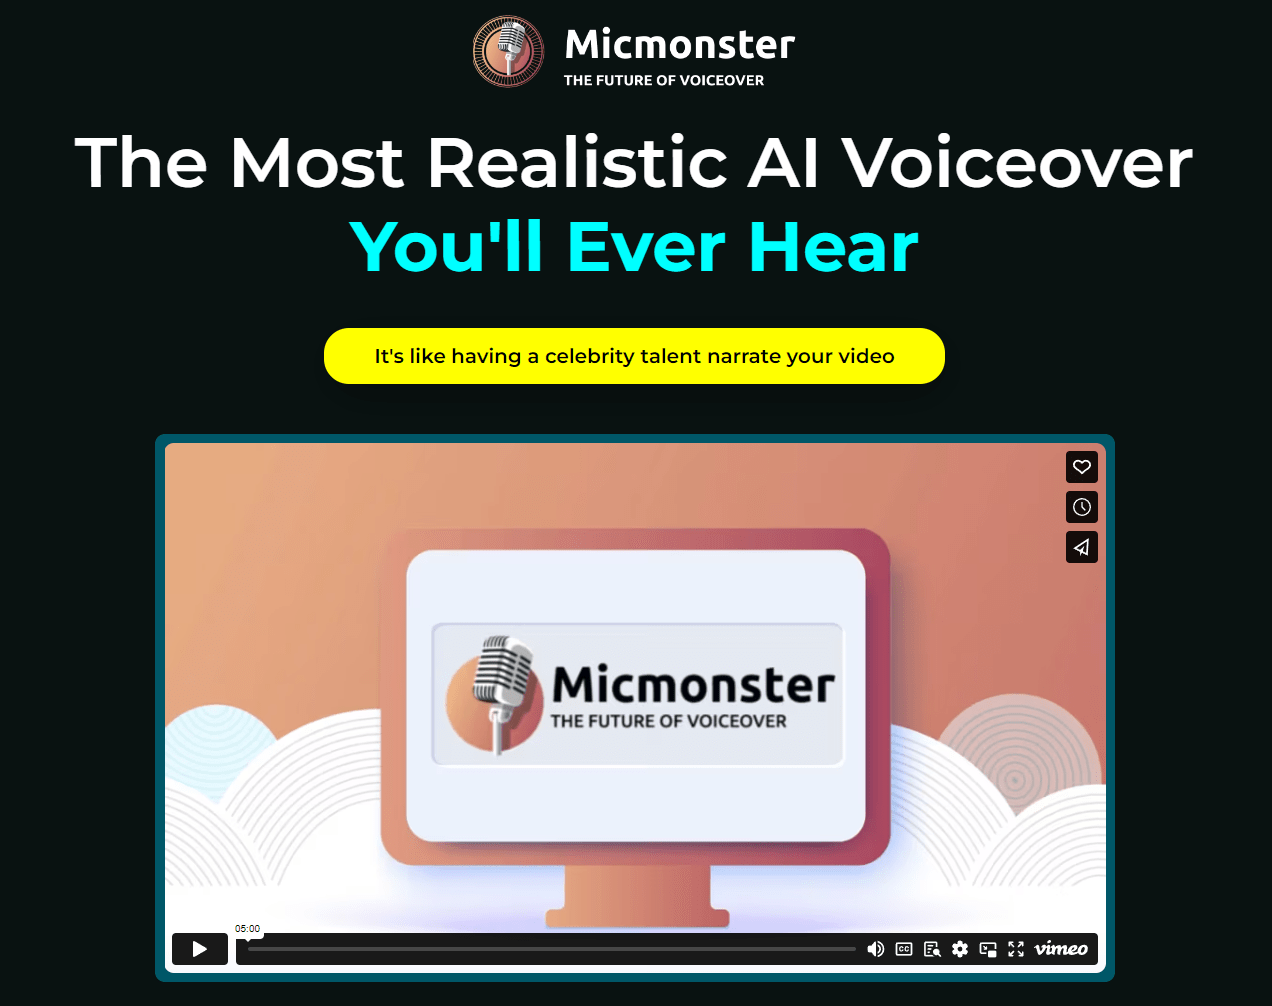 MicMonster emerges as the unparalleled leader in the realm of A. I voiceover technology can transform text from any language into convincingly human-like voiceovers in a blink—specifically, under seven seconds. 